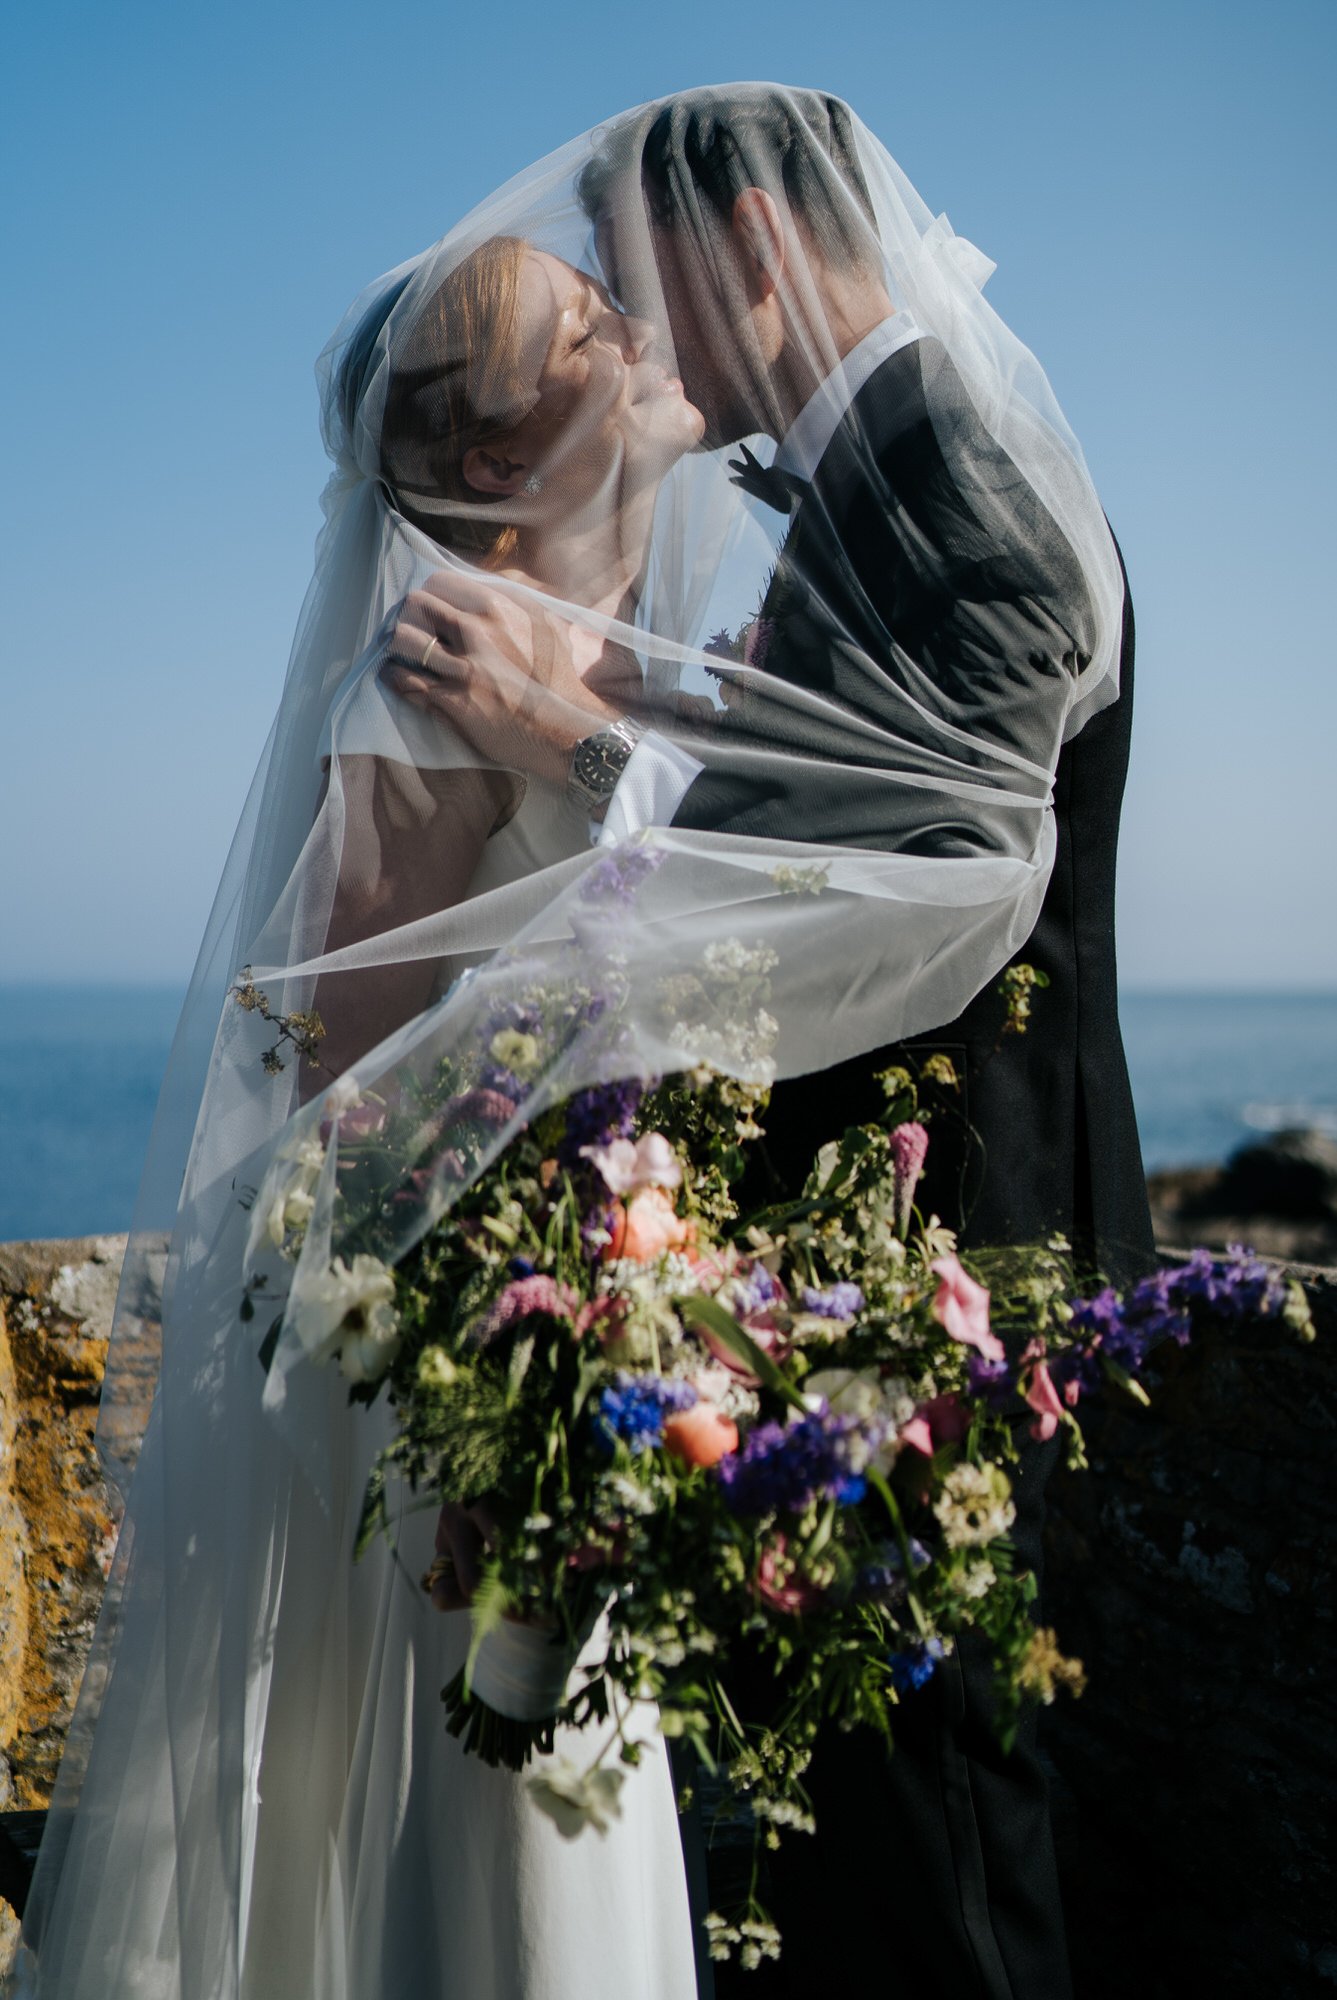 Ethereal portrait of bride and groom embracing each other under the veil as the sunlight hits her face